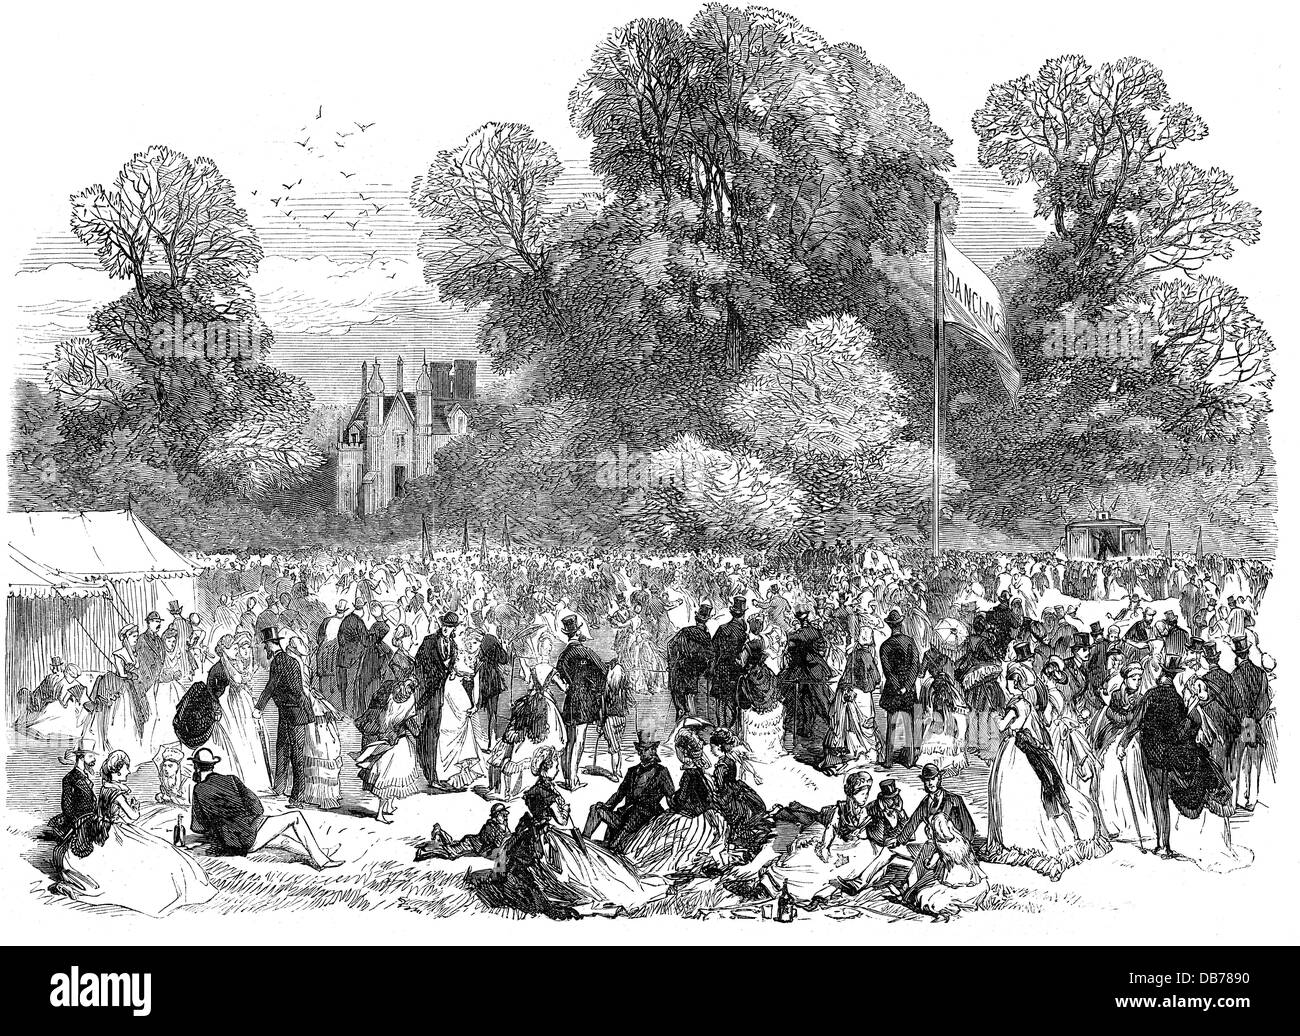 festivity, charity balls, festival of the Great Western Railway Widows' and Orphans' Fund, Beckett Park, Shrivenham, wood engraving, Illustrated London News, 16.7.1870, Additional-Rights-Clearences-Not Available Stock Photo